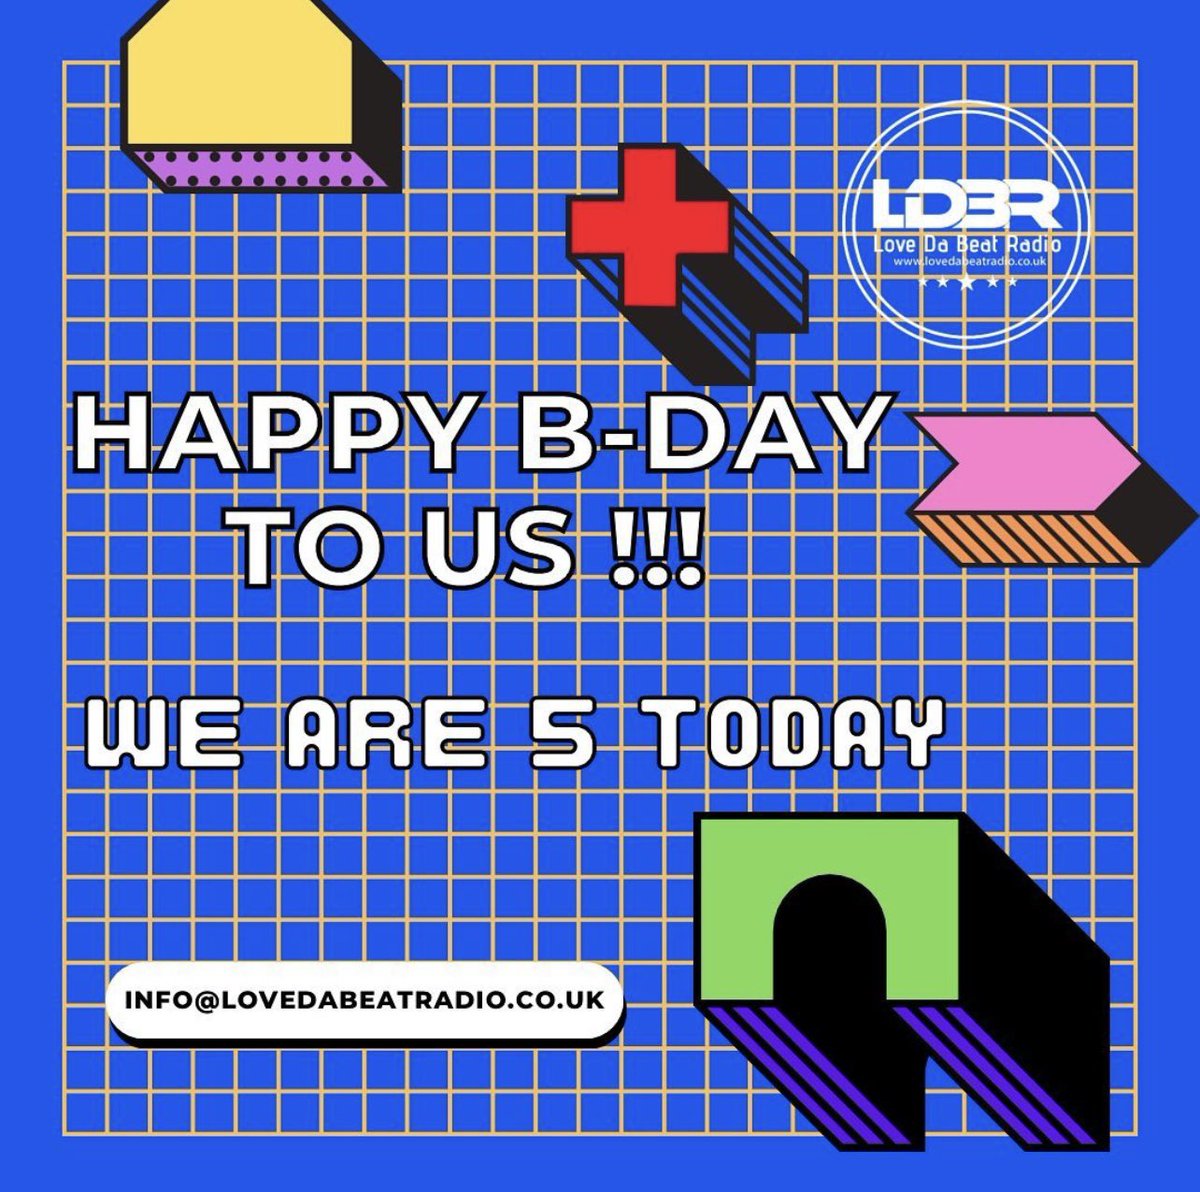 It’s our 5th birthday today 🎉🎂🎈#HappyBirthday